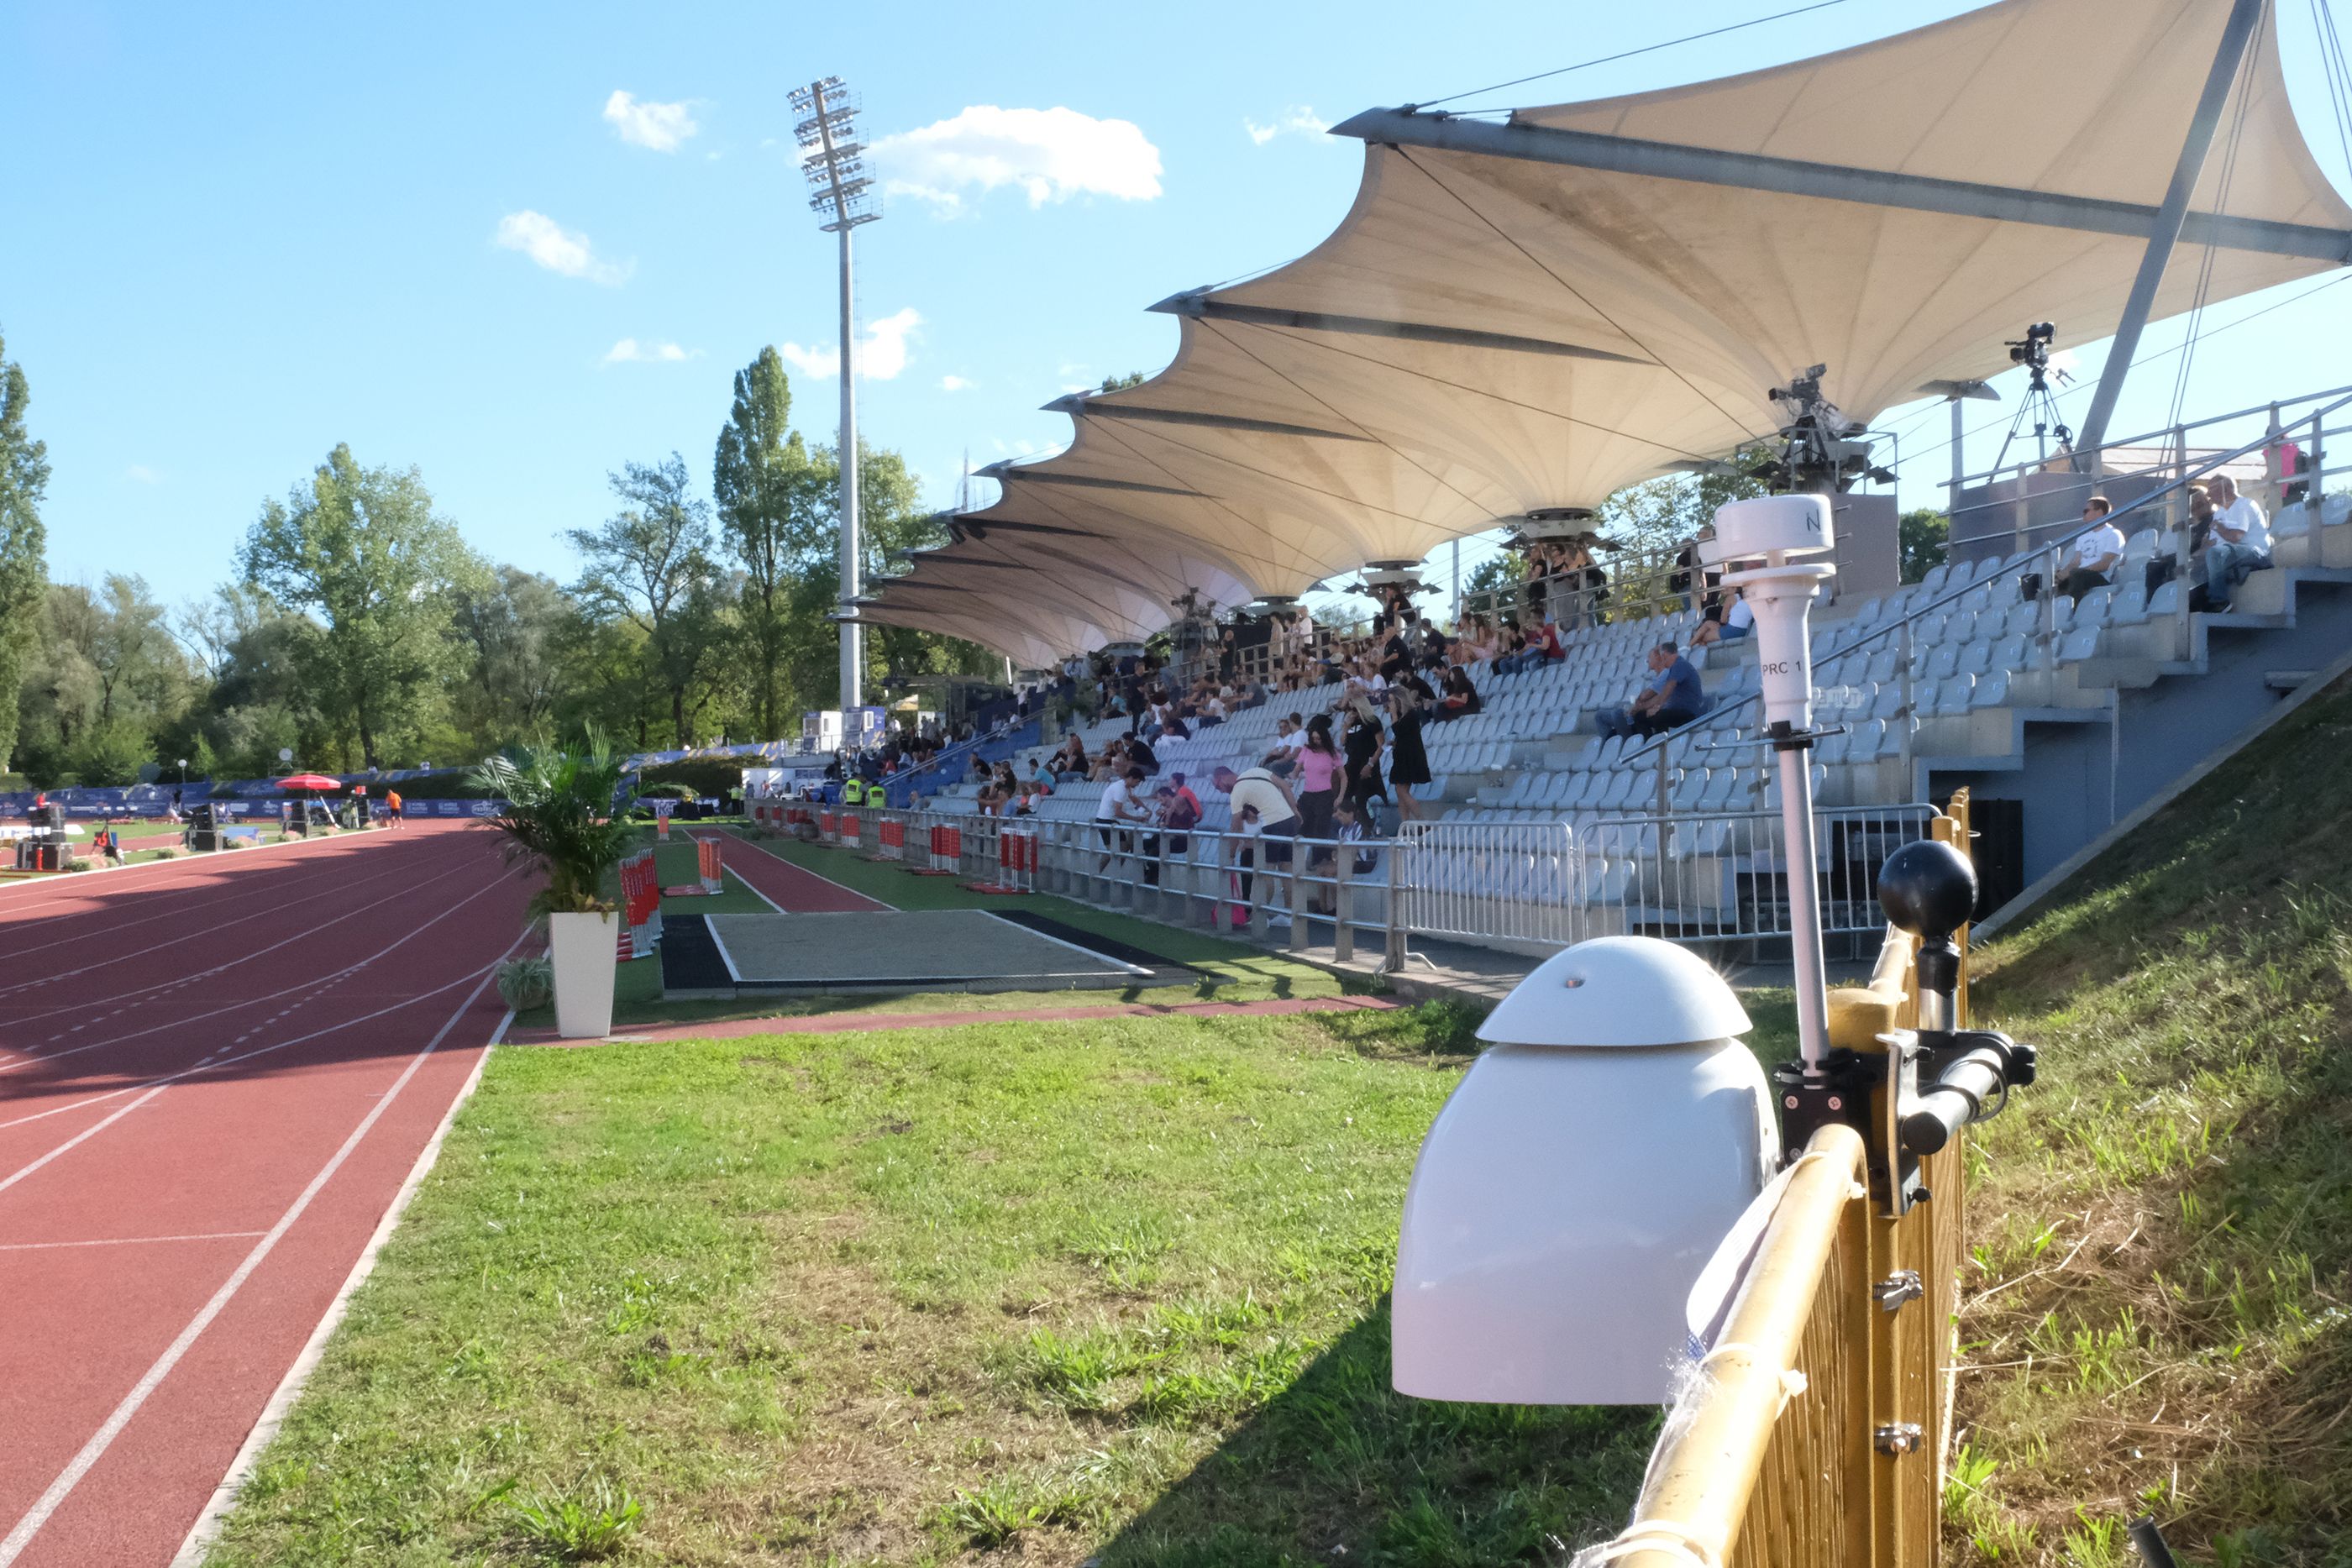 The Kunak monitoring device next to the track at the Sports Park Mladost